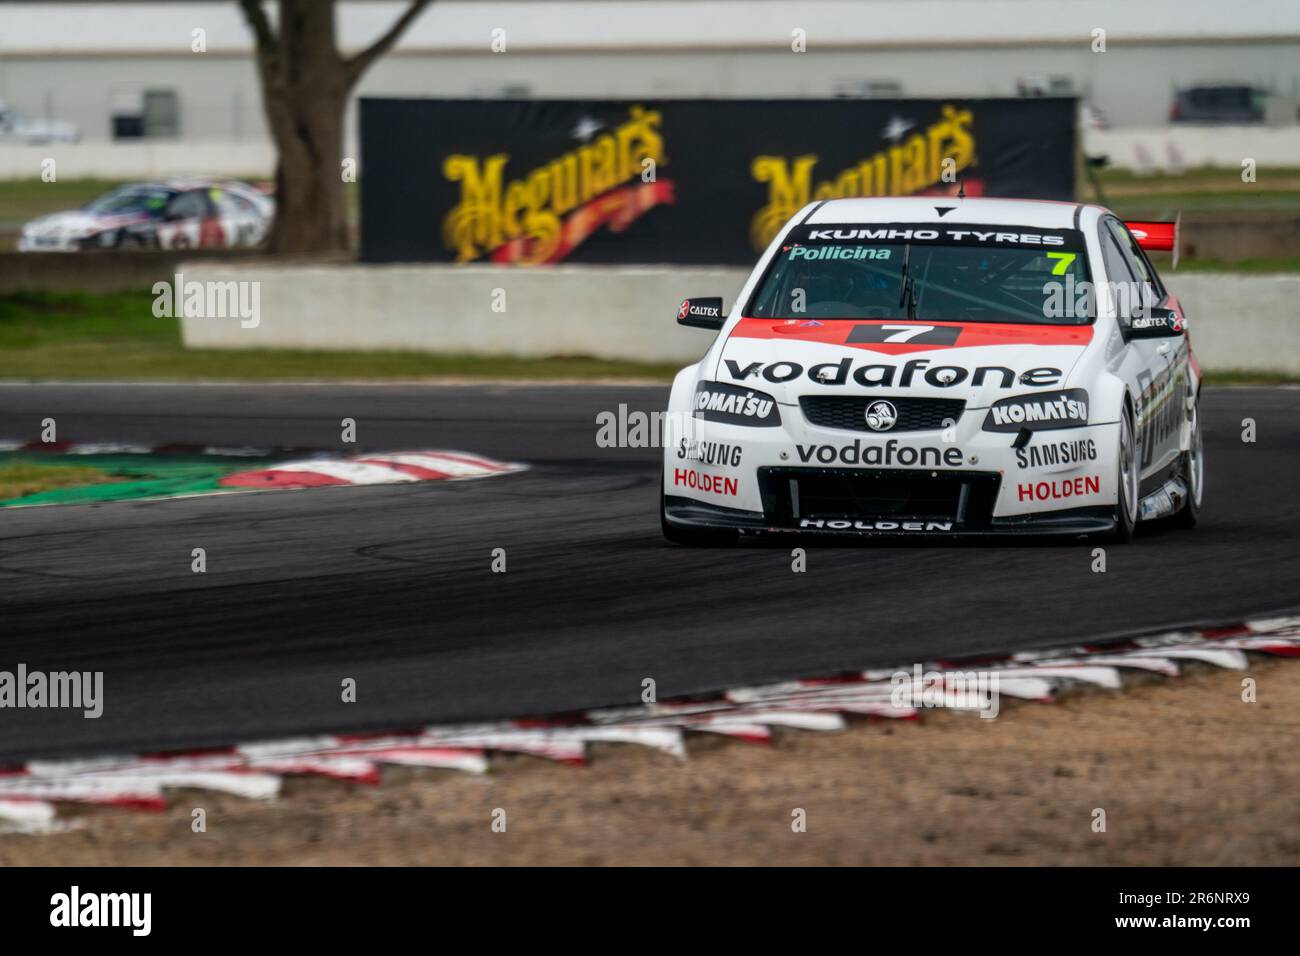 Winton, Australia. 10 June, 2023. Jim Pollicina (#7) accelerates out of turn 3 at Winton Motor Raceway in his Holden Commodore. Credit: James Forrester / Alamy Live News Stock Photo